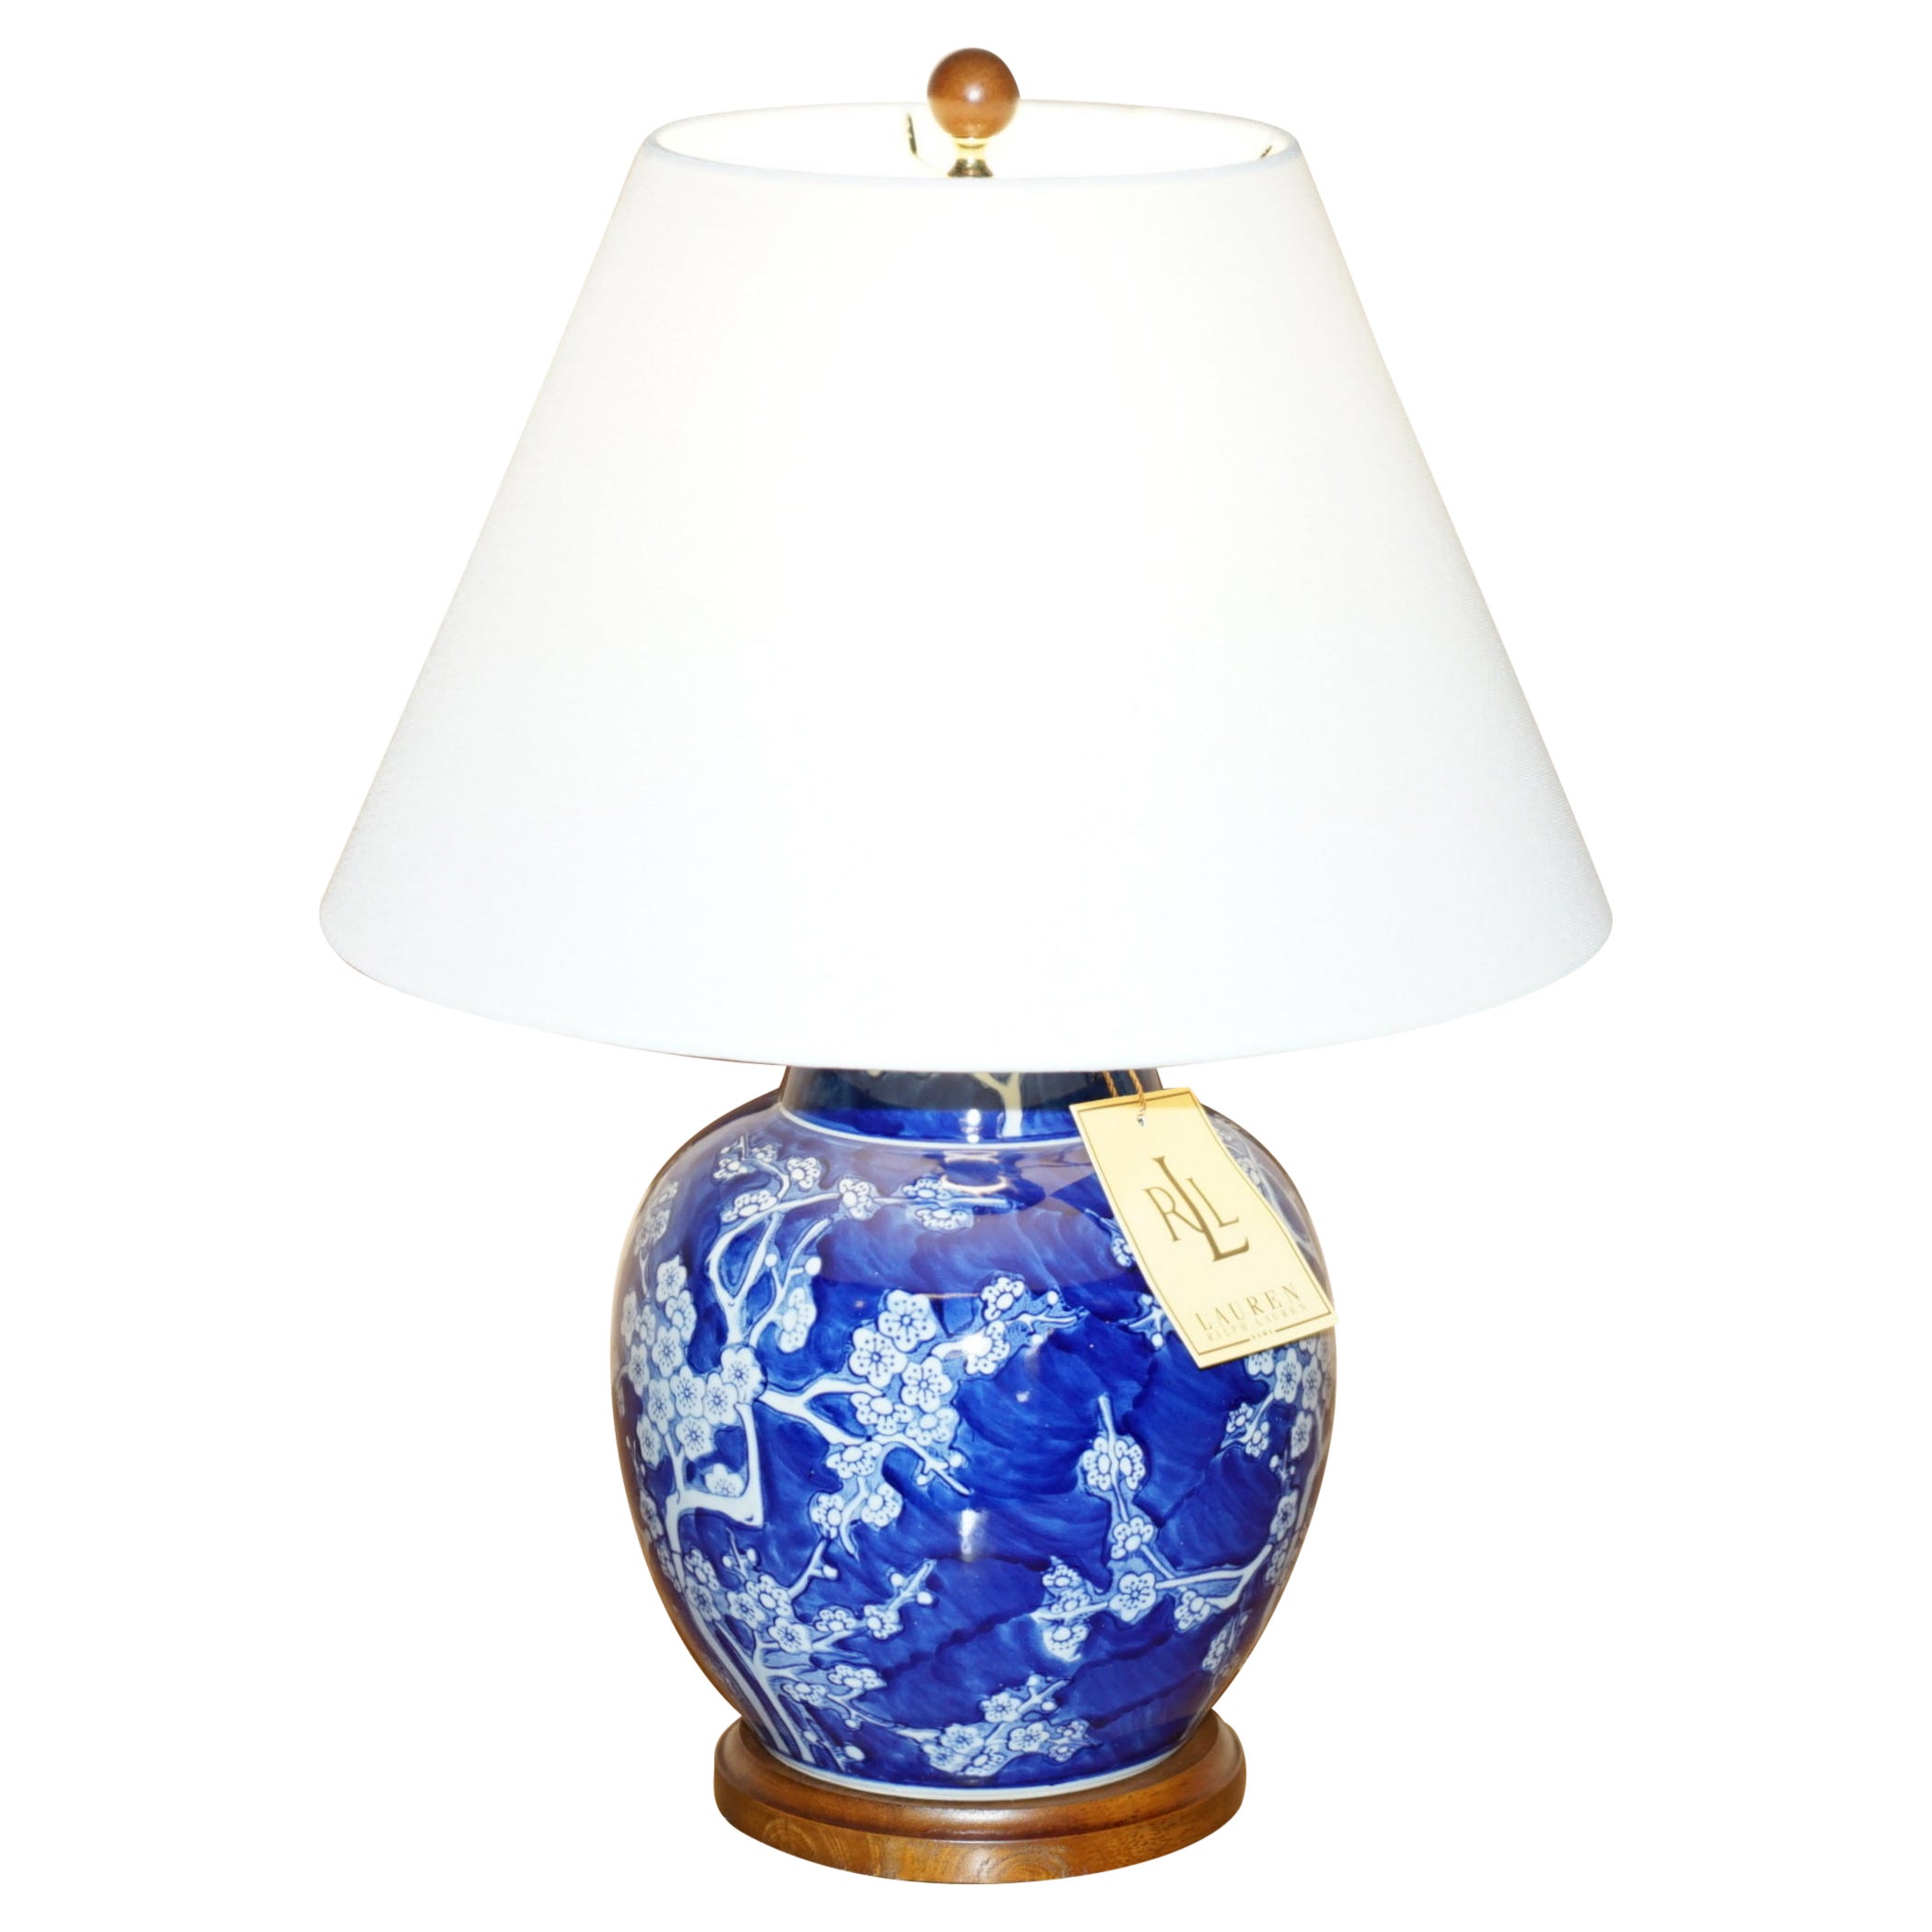 1 OF 6 BRAND NEW BOXED RALPH LAUREN COBALT BLUE & WHITE CHINESE PORCELAIN LAMPs